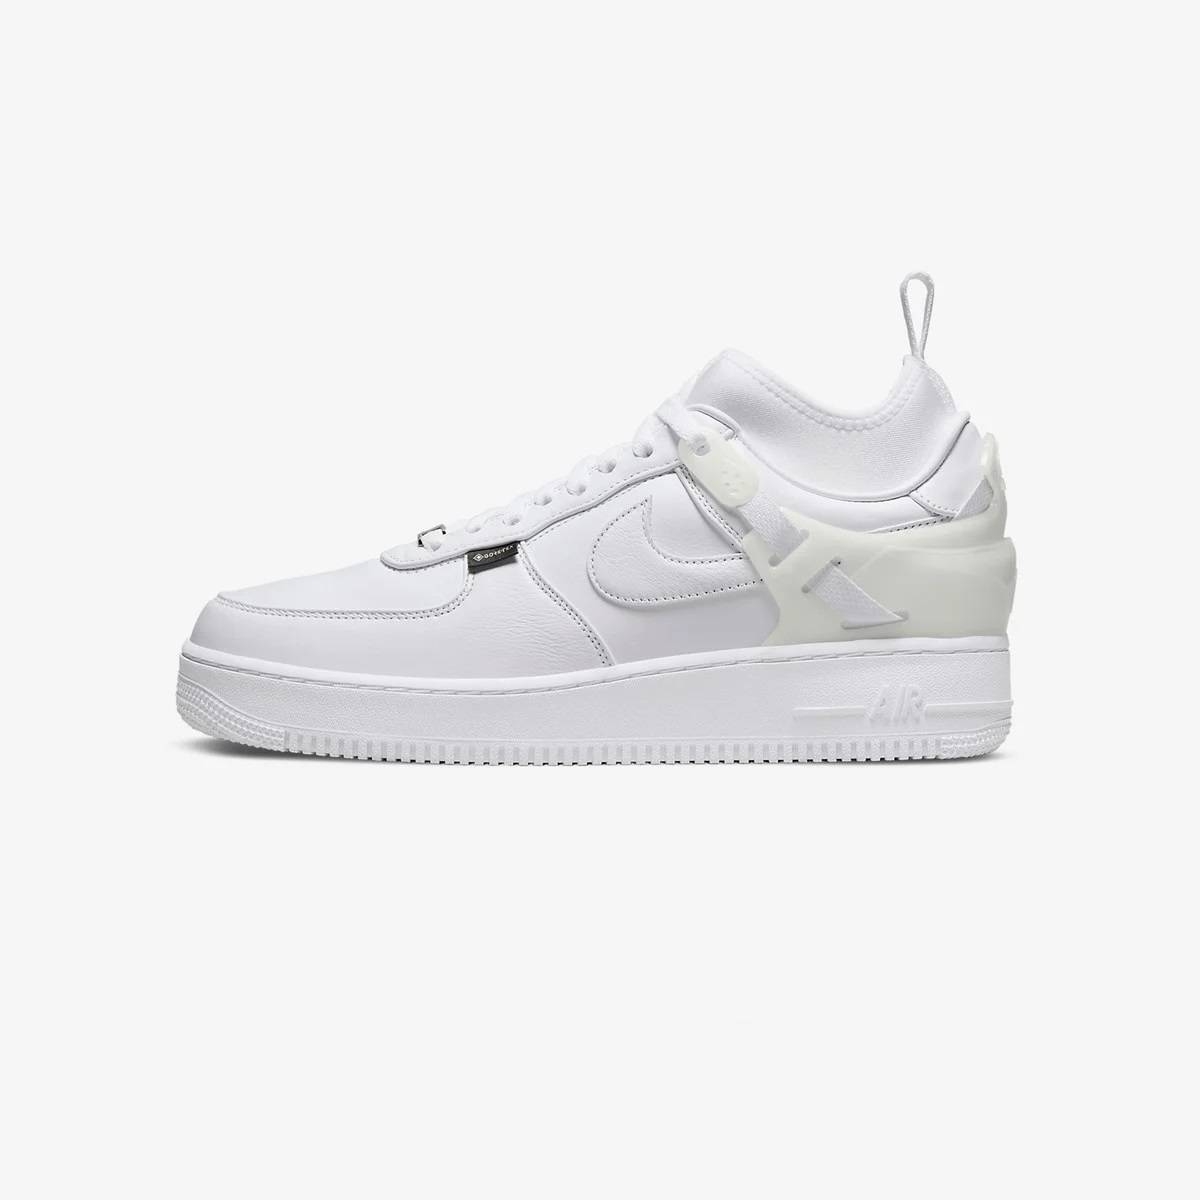 NIKE AIR FORCE 1 LOW SP UNDERCOVER